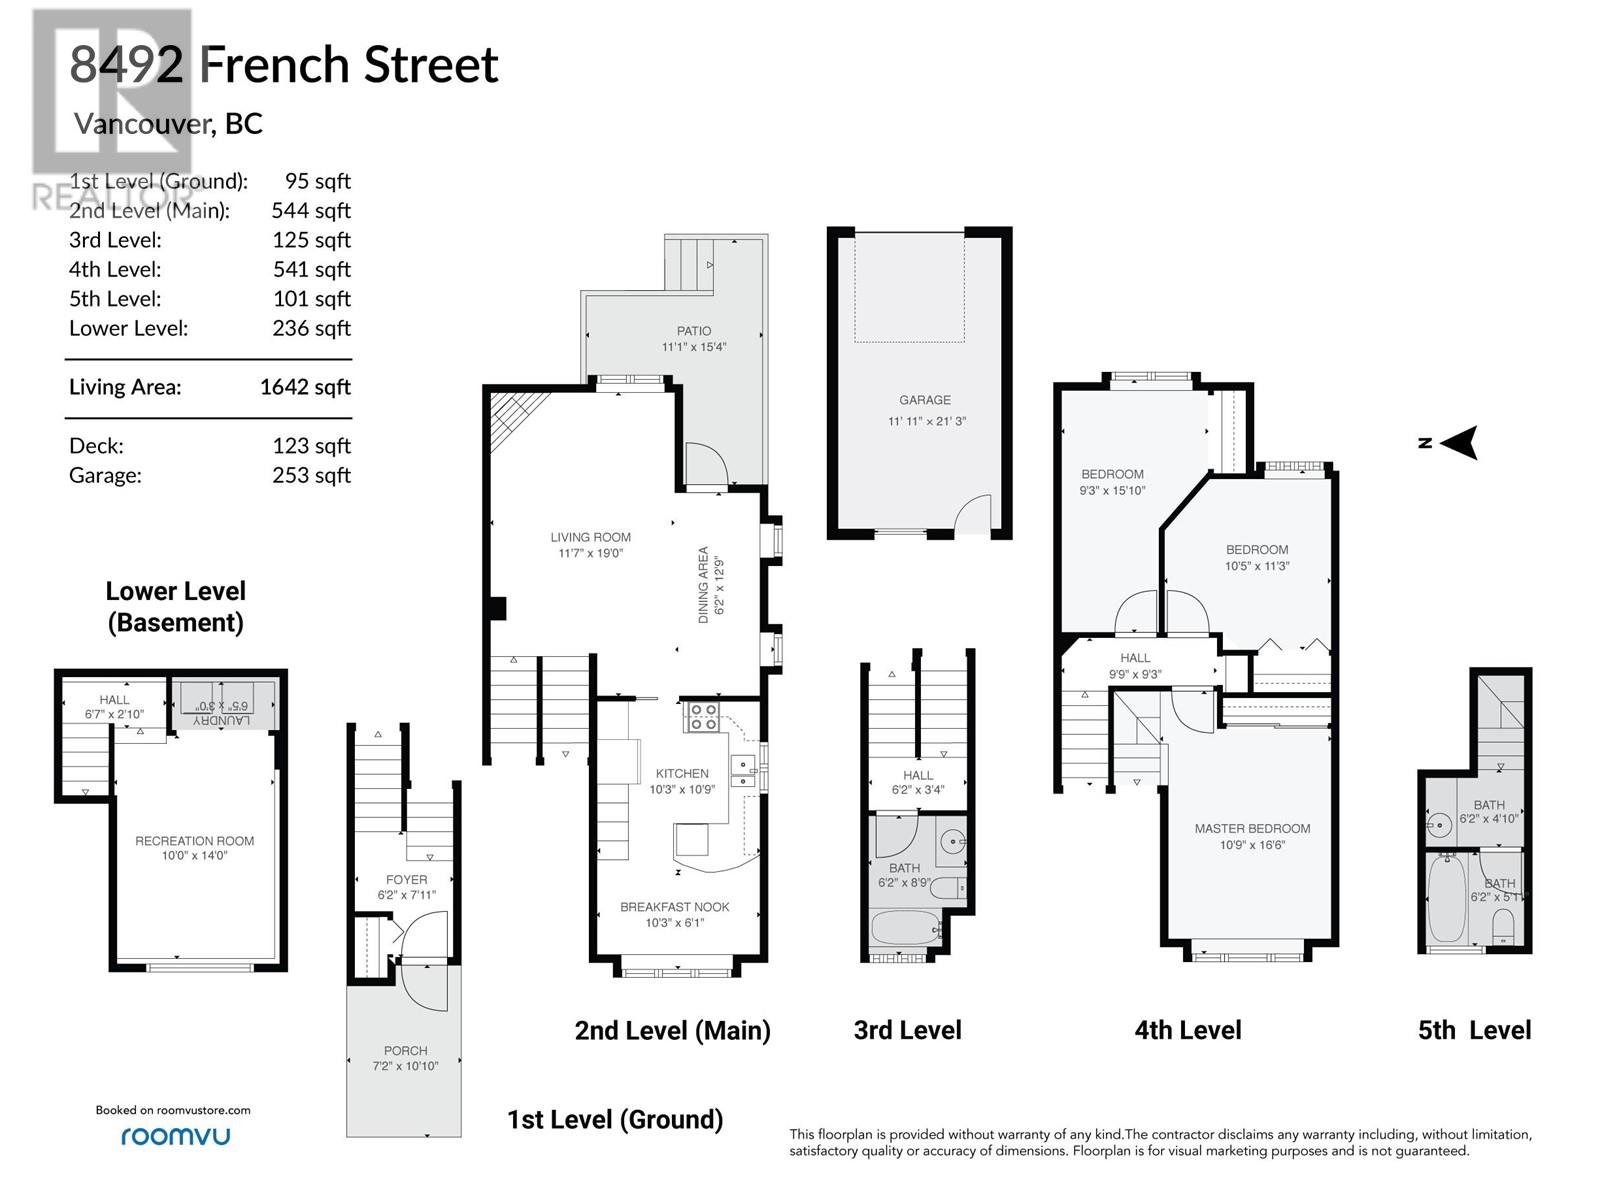 Listing Picture 22 of 22 : 8492 FRENCH STREET, Vancouver / 溫哥華 - 魯藝地產 Yvonne Lu Group - MLS Medallion Club Member